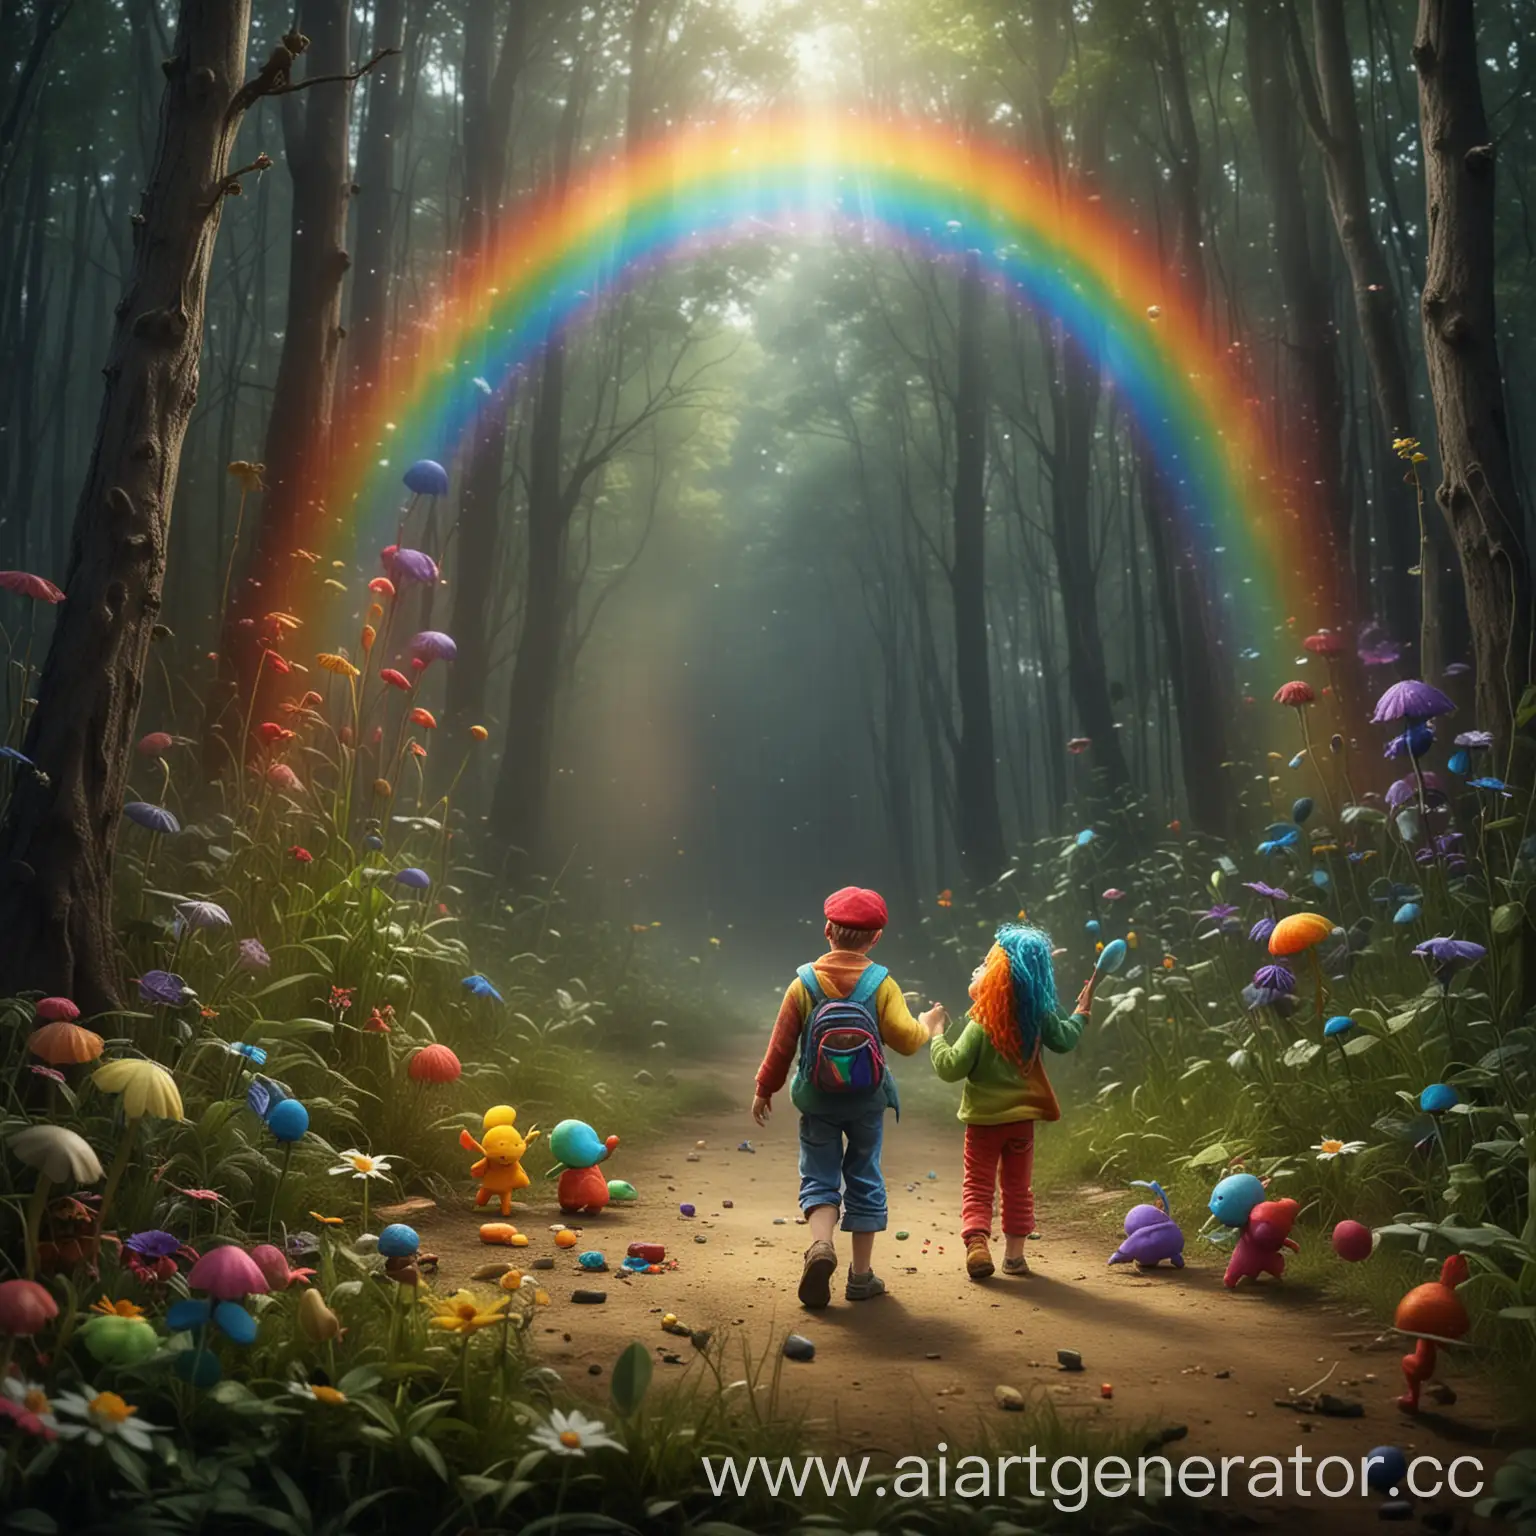 Enchanted-Tale-of-Rainbow-Folk-and-the-Dangers-of-Substance-Abuse